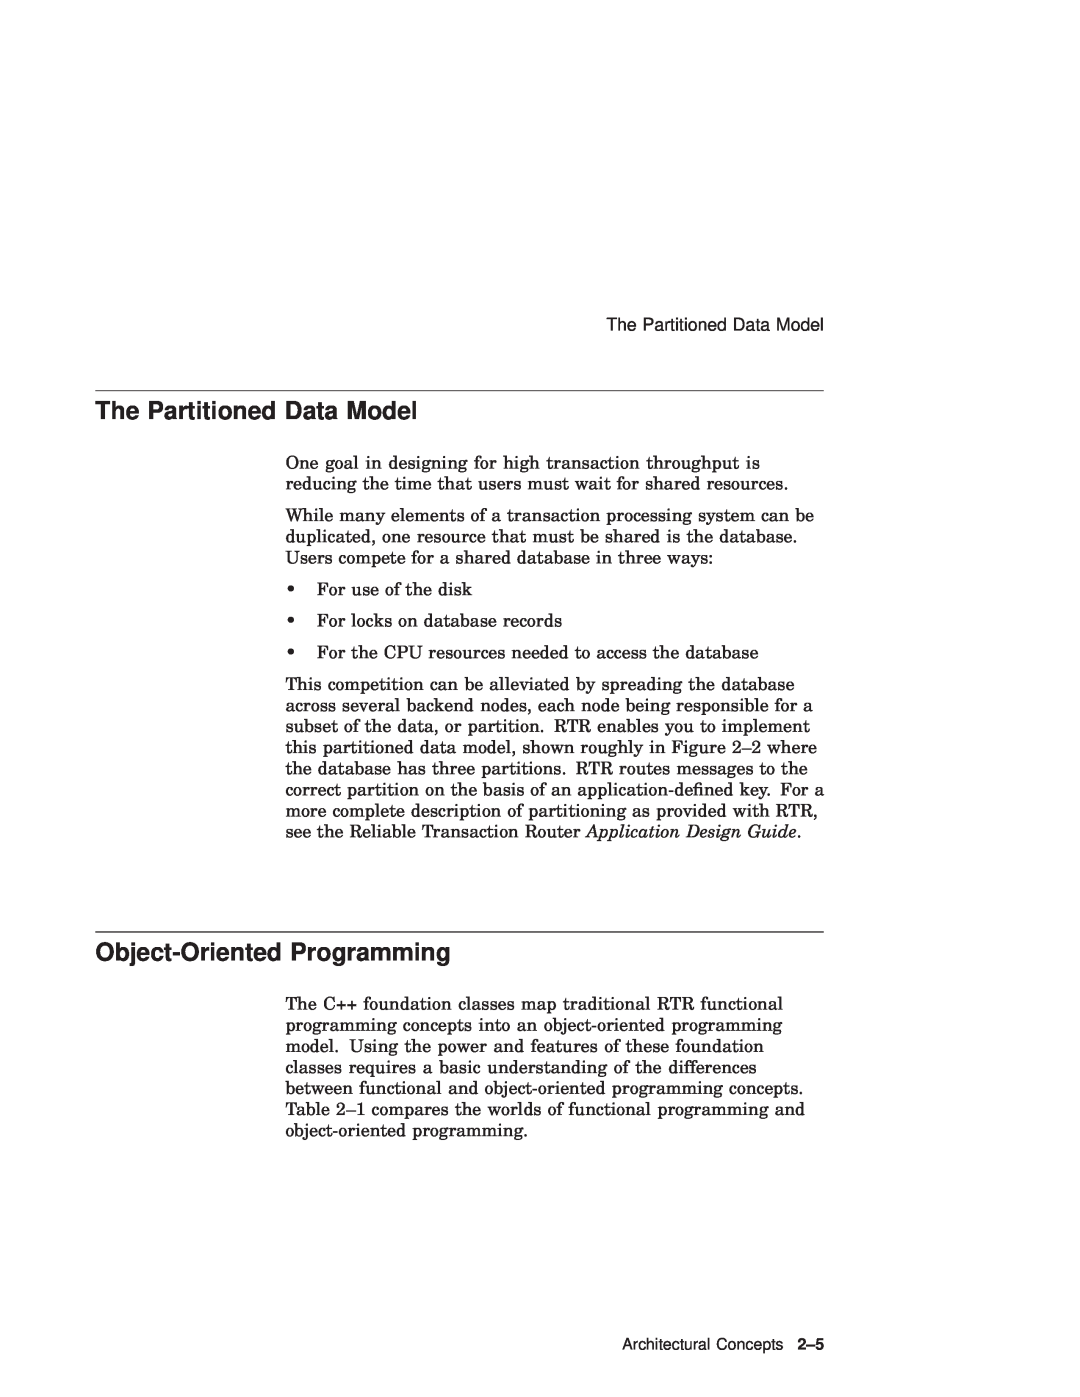 Compaq Reliable Transaction Router manual The Partitioned Data Model, Object-Oriented Programming 